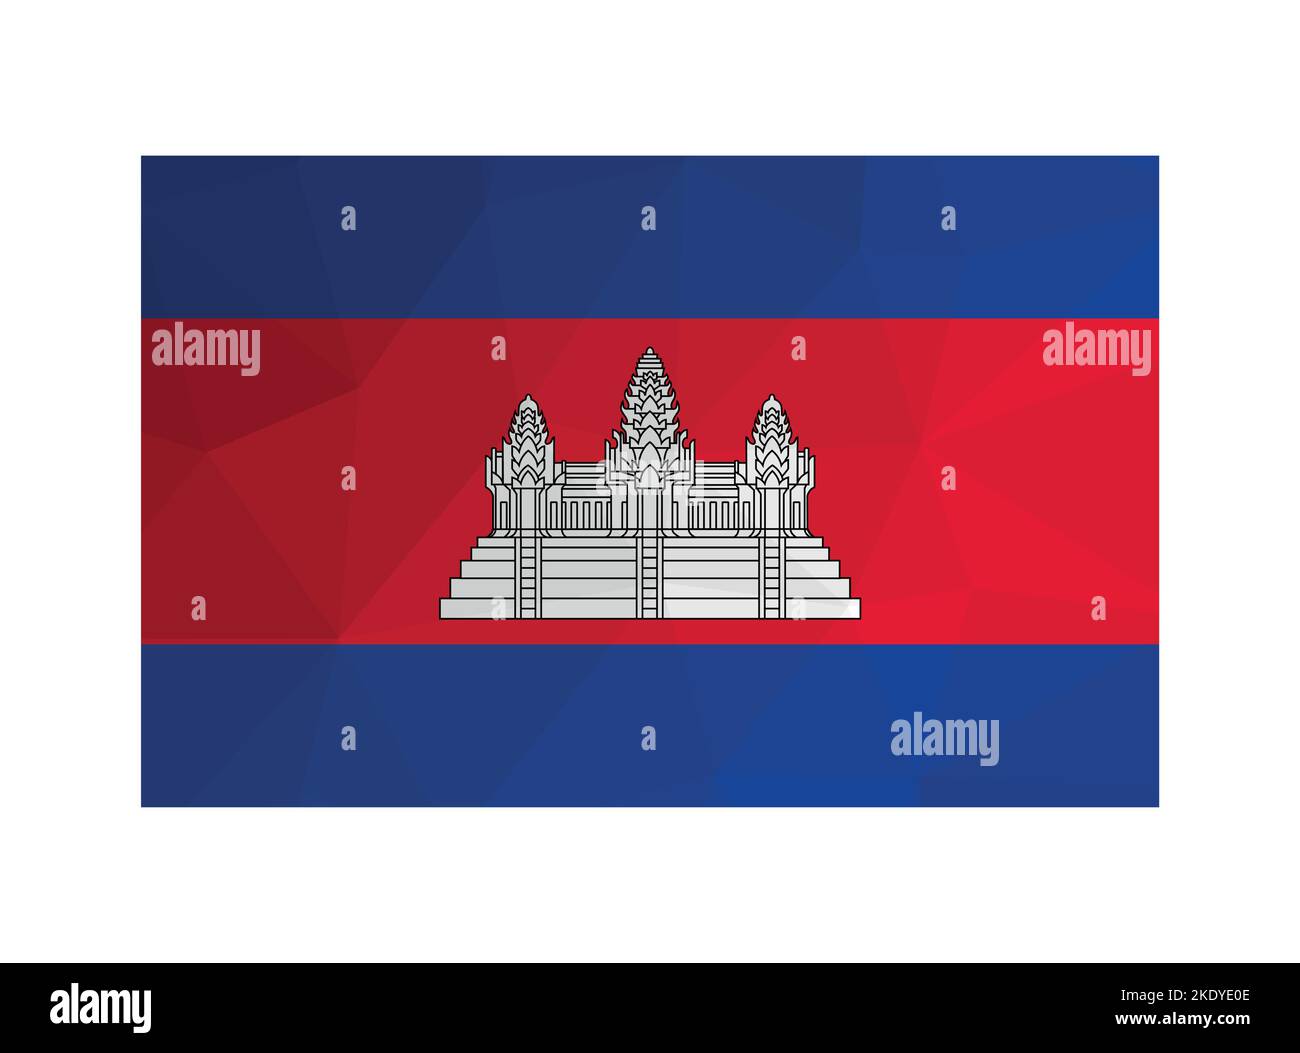 Vector illustration. Official ensign of Cambodia. National flag in red, blue colors with white temple complex Angkor Wat. Creative design in polygonal Stock Vector